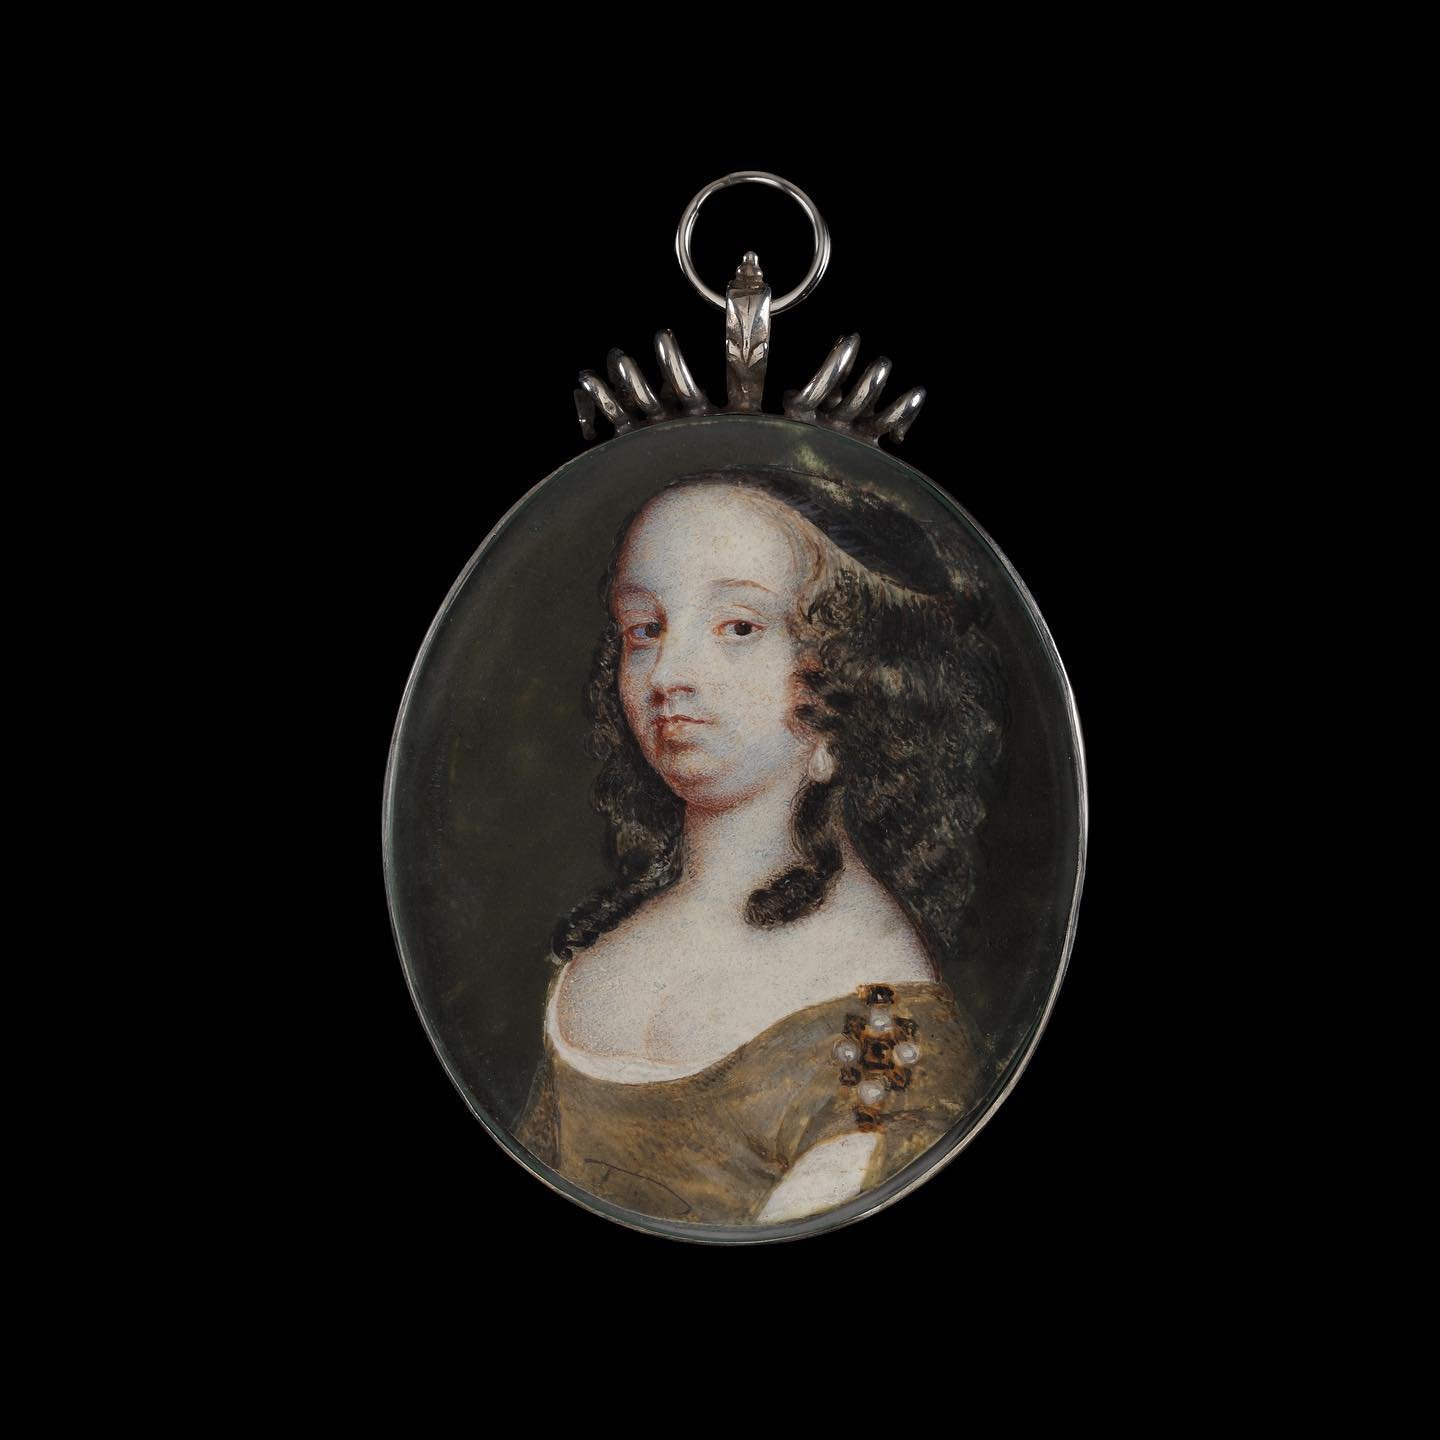 Now on our website, this particular (and rather unflattering) portrait miniature by Richard Gibson (1615-1690) has yet to be identified but can be dated between 1655-60 based on stylistic comparisons. An almost identical version was last sold at Bonh